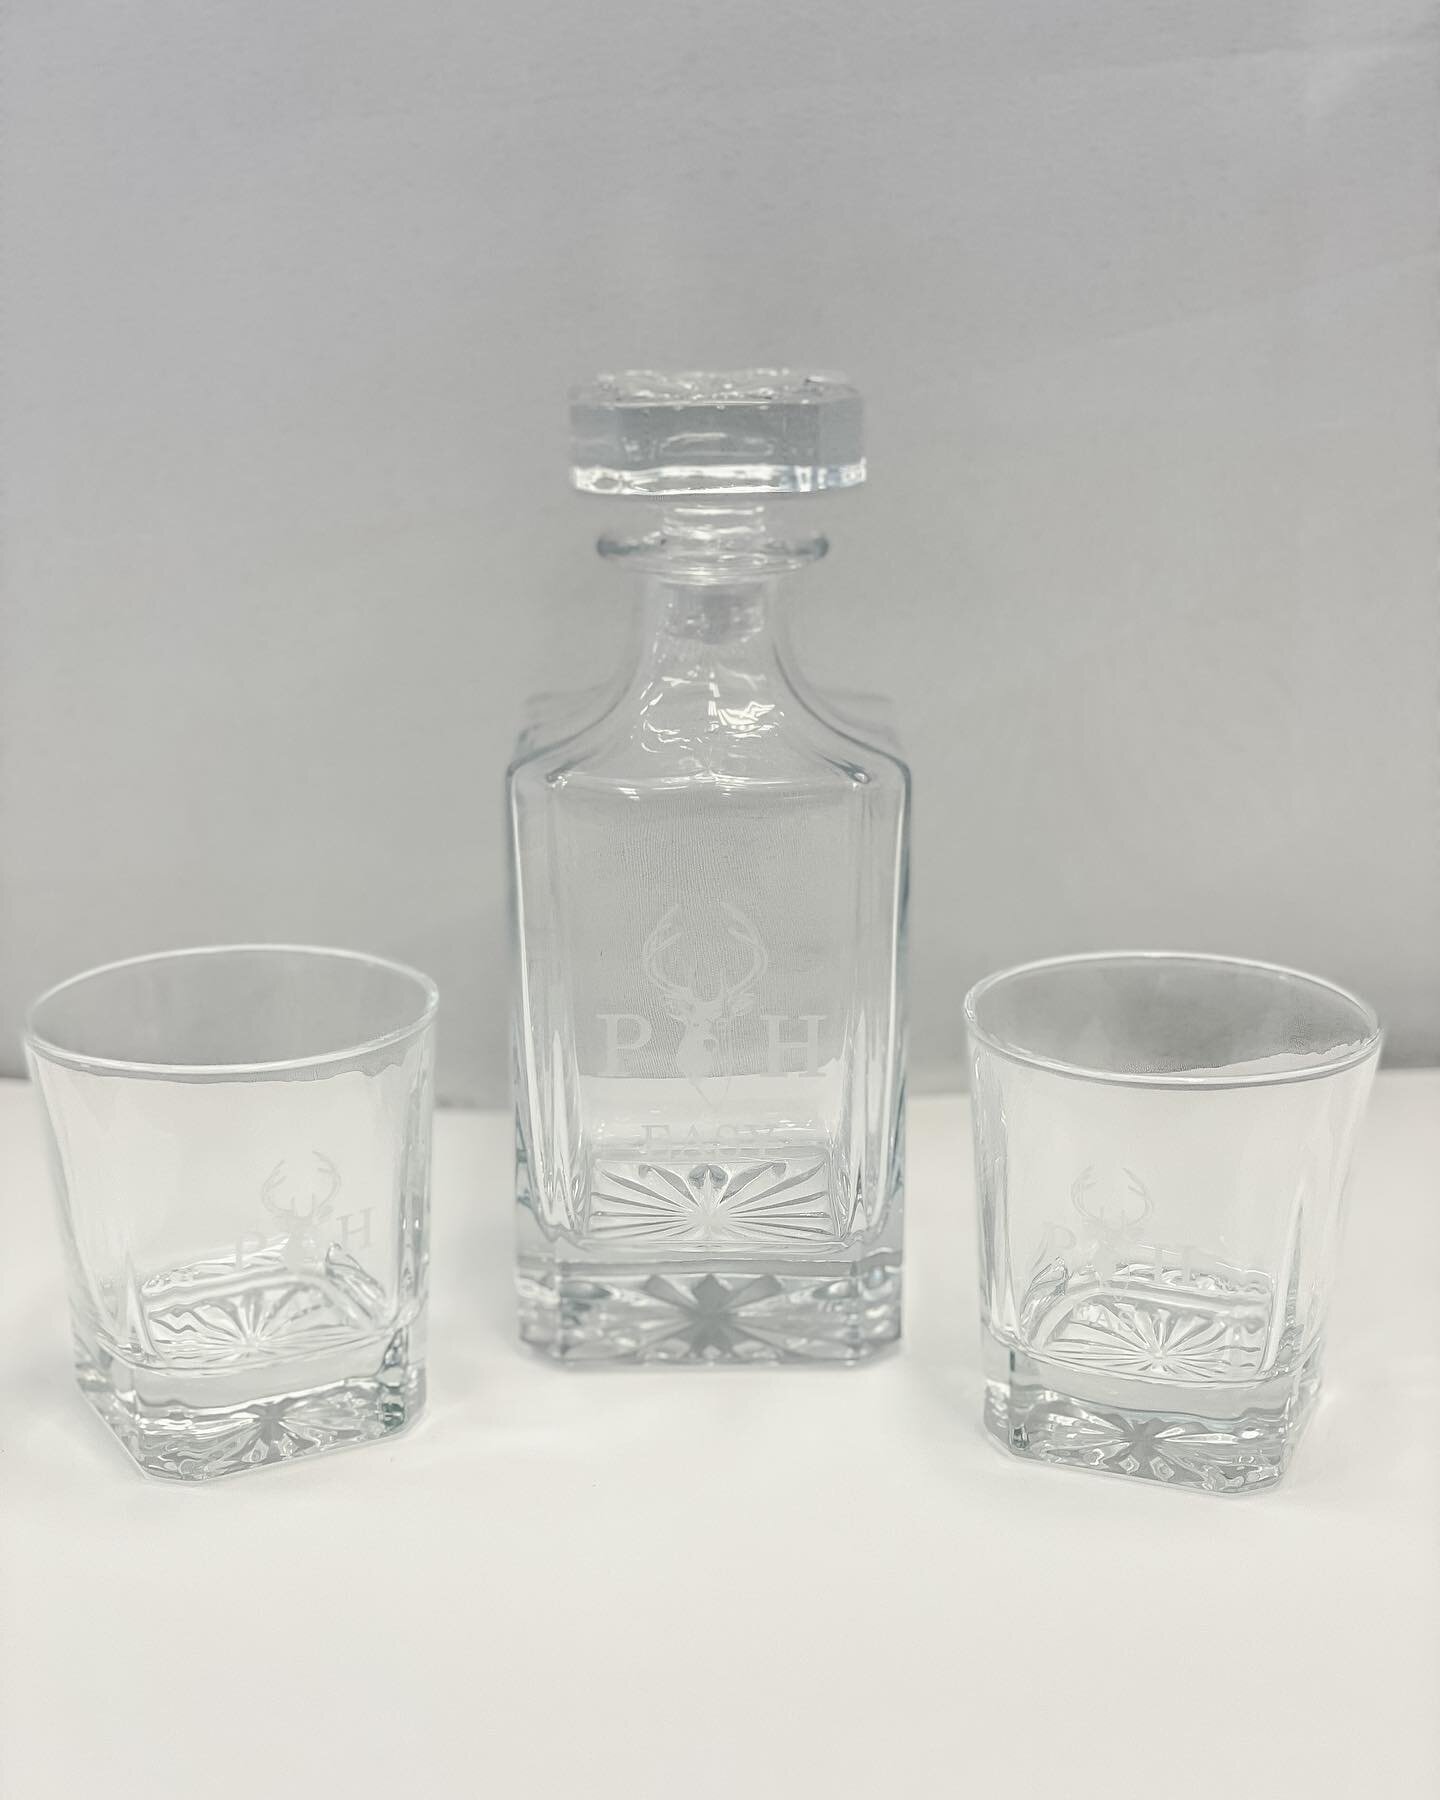 Are you in need of a timeless and customized gift? Check out our beautiful glassware options ranging from decanters, champagne flutes, low ball glasses, and more!
.
.
.
.
.
.
.
#customizedgifts #customizedgift #customizedglassware #customglassware #g